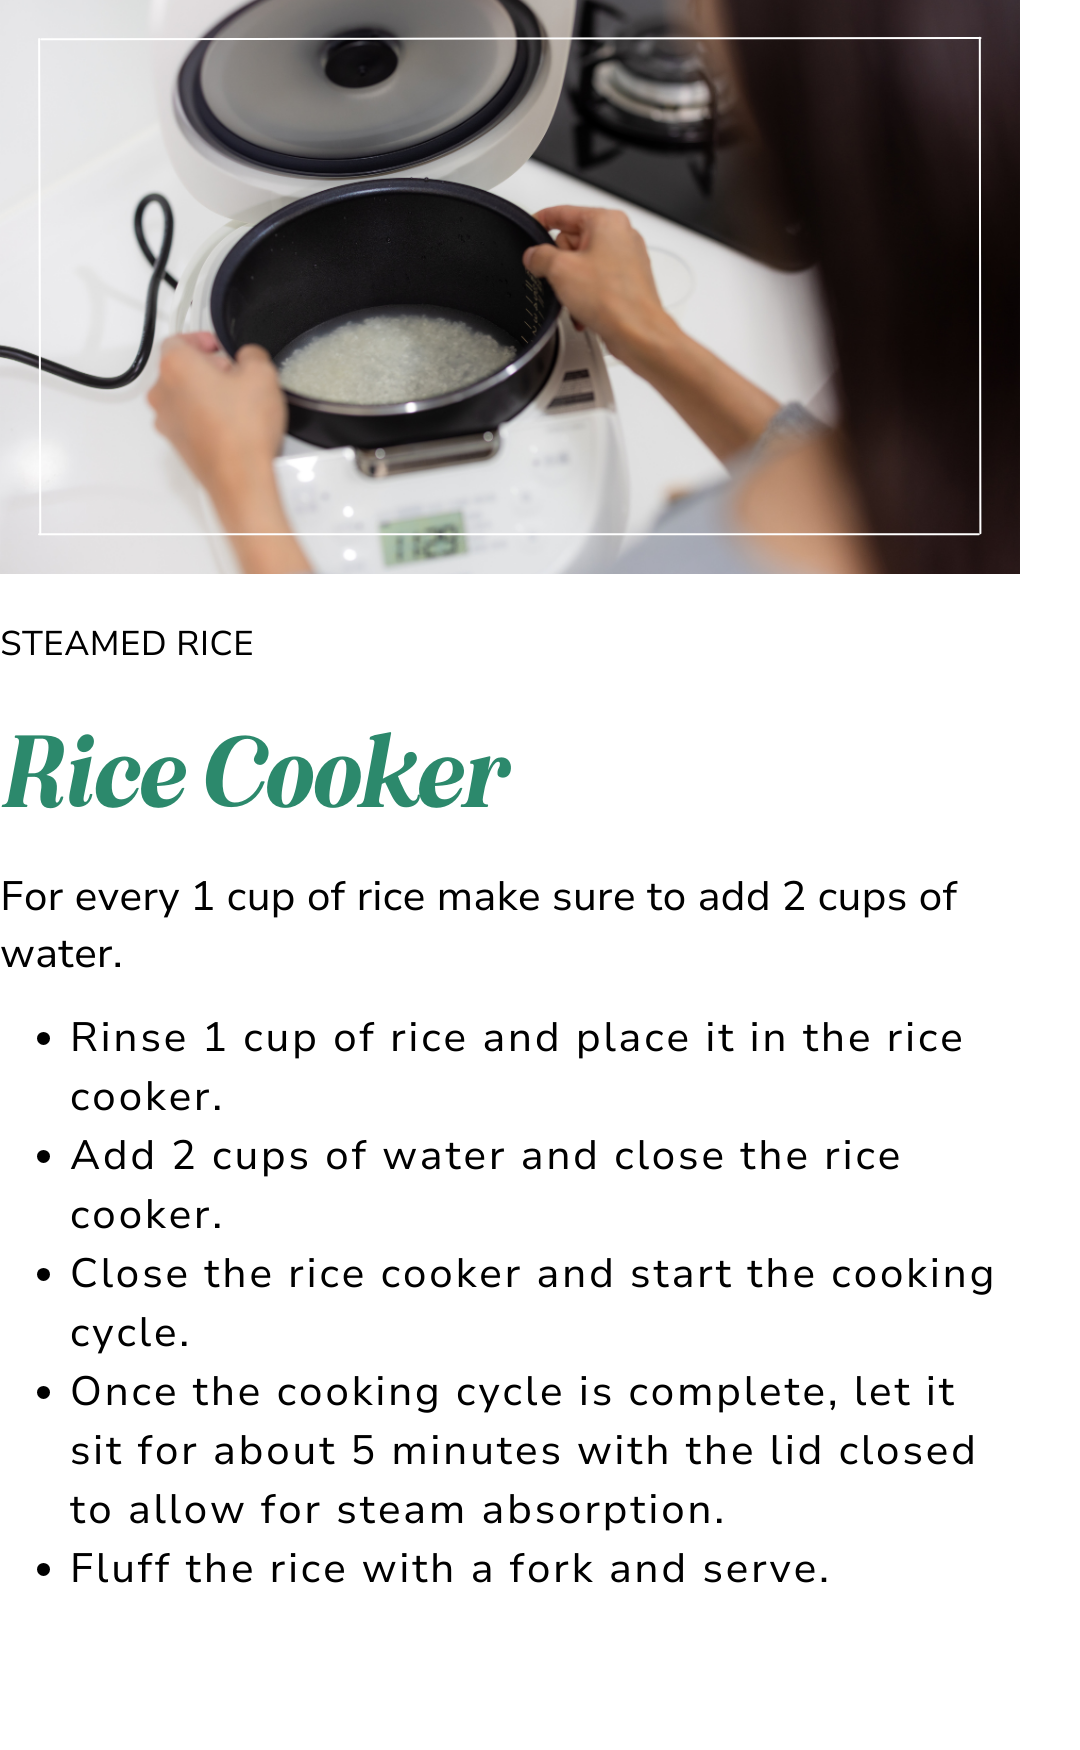 How to make rice in the rice cooker? 🍚 😋 · Issue #172 · dwyl